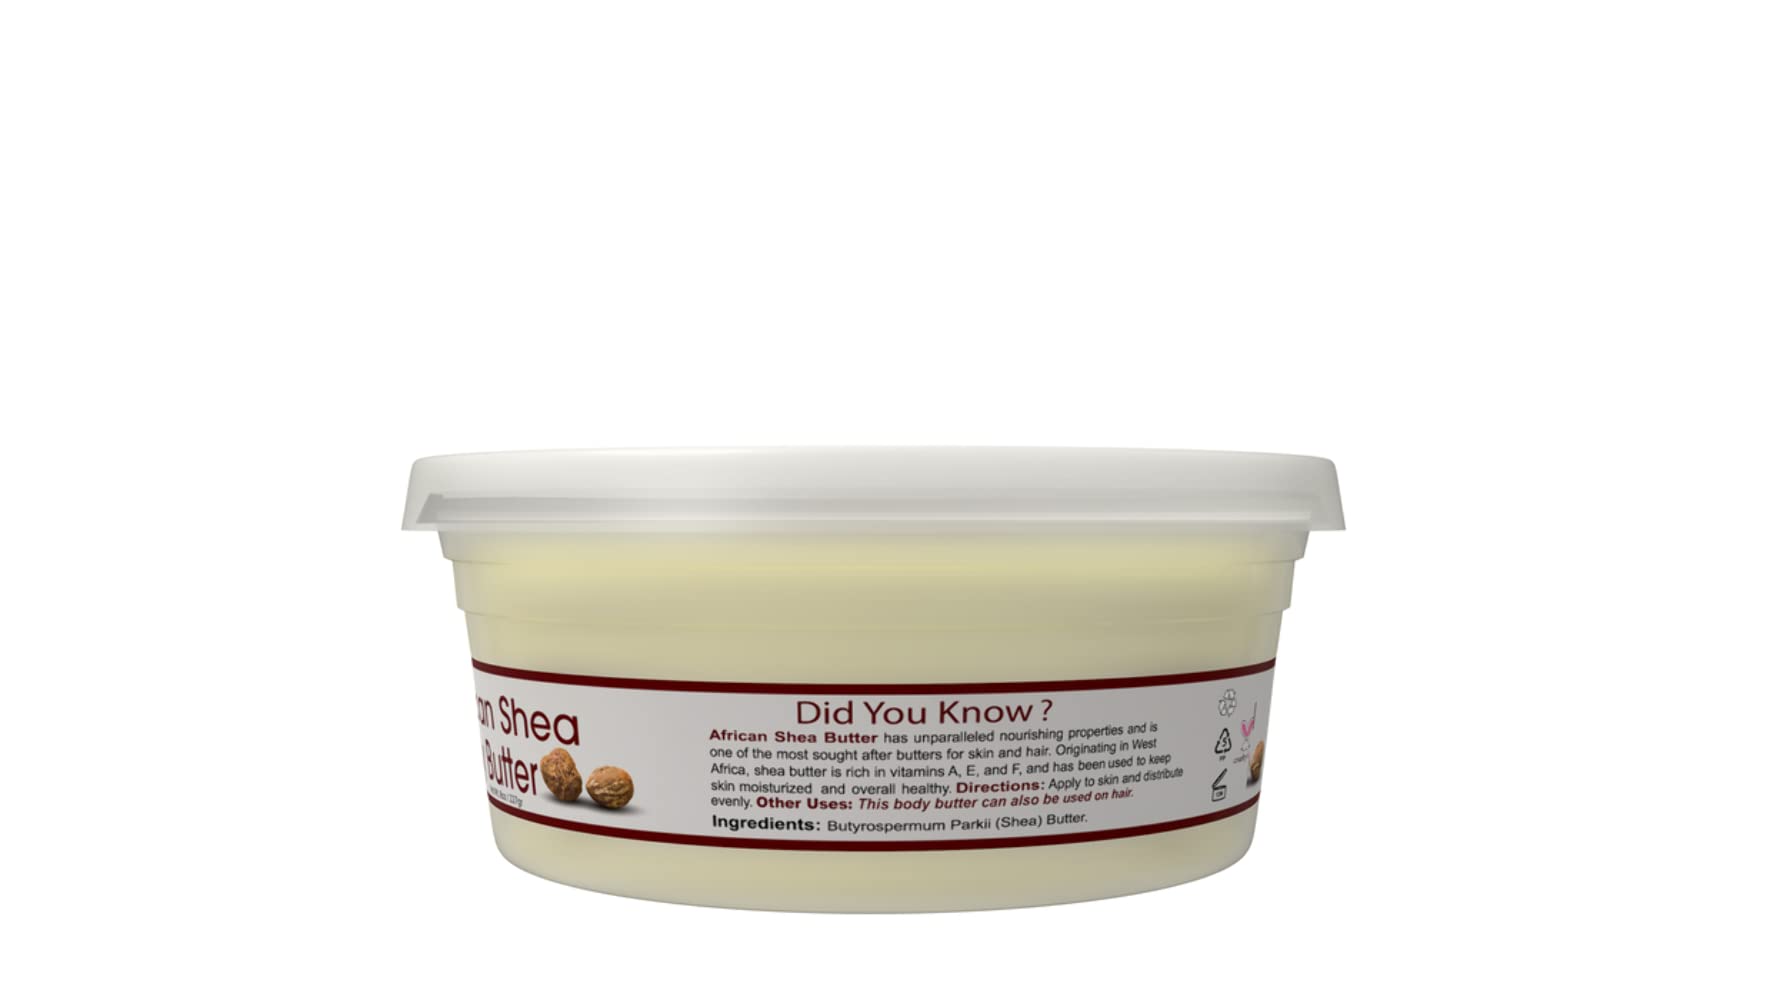 OKAY | African Shea Butter | For All Hair Textures & Skin Types | Daily Moisturizer - Soothe Irritation | White Smooth Refined | All Natural | 7.5 Oz